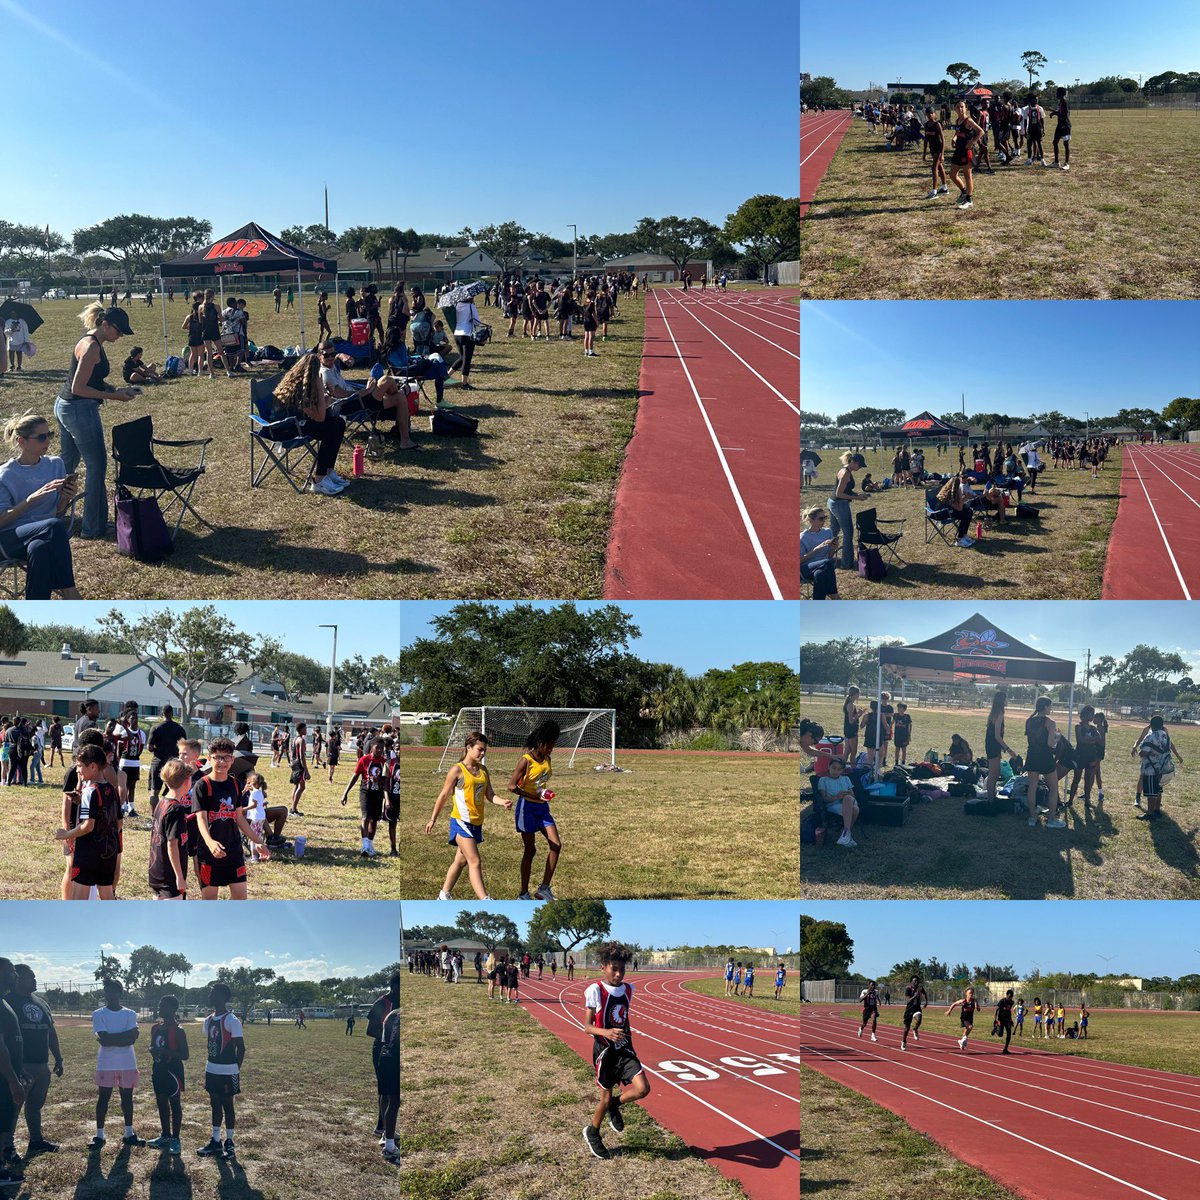 Ready to sprint, jump, and soar! 🏃‍♀️🏃‍♂️ Thrilled to host a track meet with 4 amazing schools. Let the games begin! 🏅 #TrackAndField #Sportsmanship @CaelethiaTaylor @AP_Makowski @LaquandraGolf @ExpatEducatorTJ